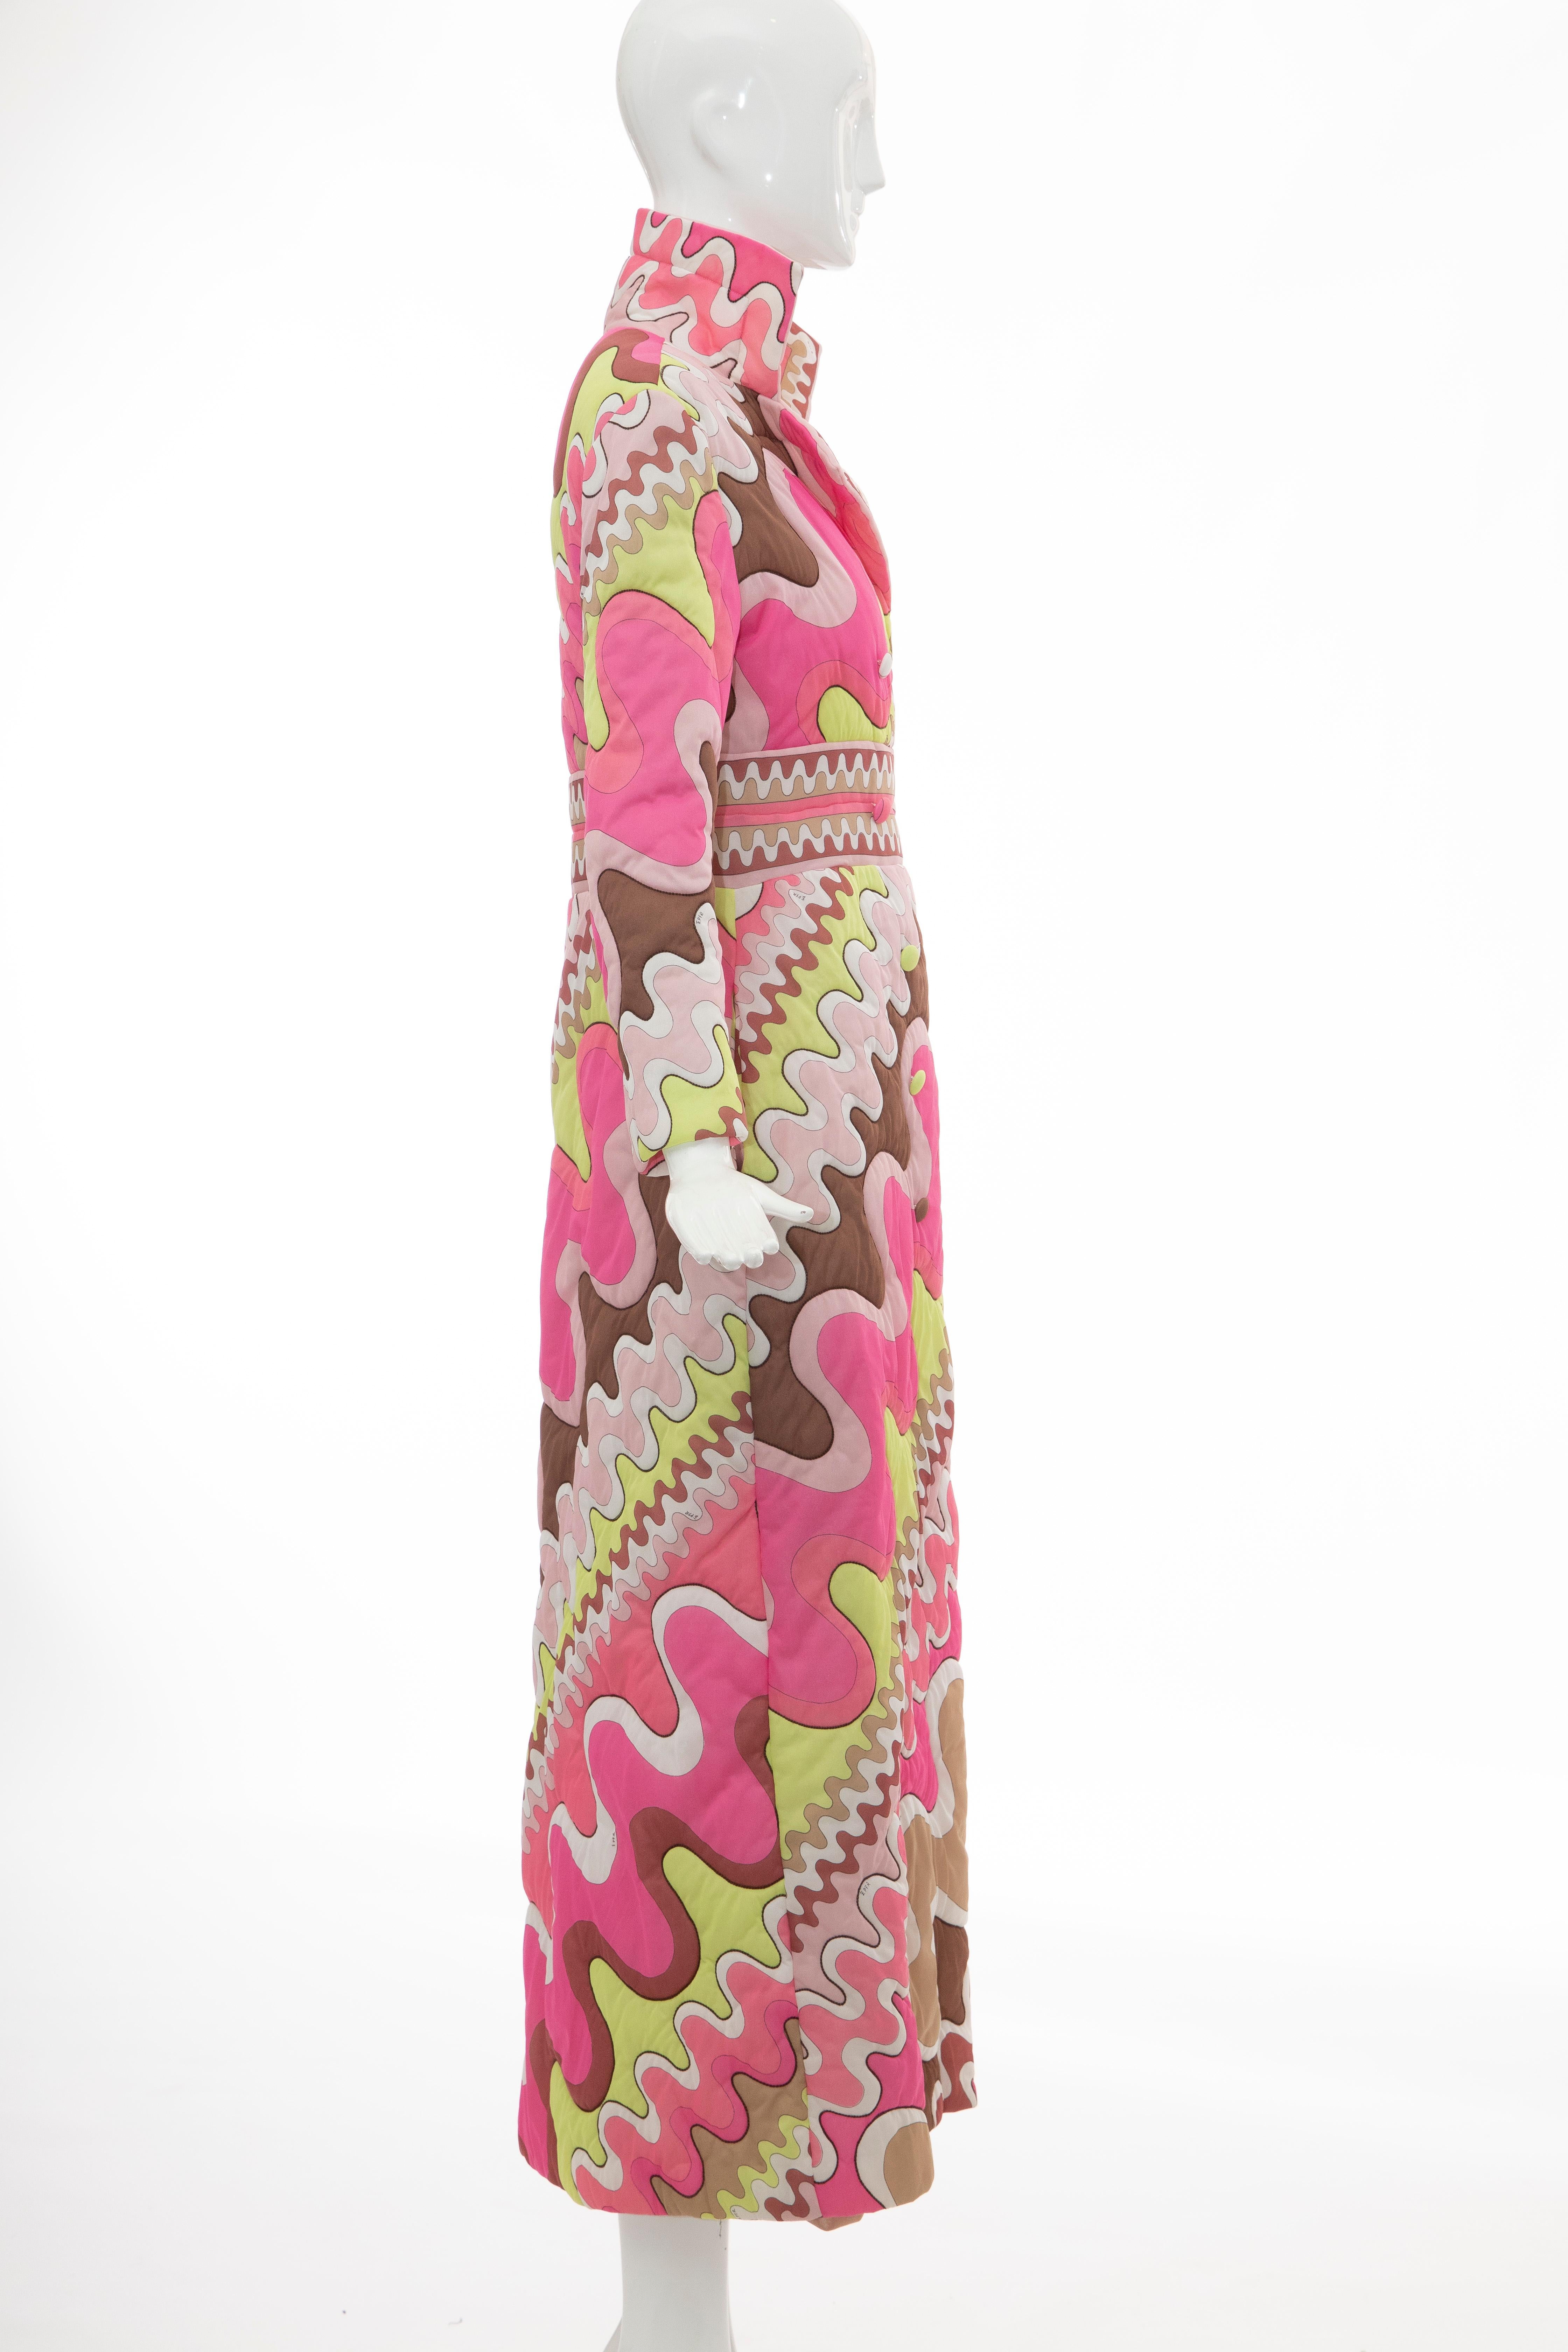 Emilio Pucci Double-Breasted Abstract Print Quilted Coat, Circa: 1970's Damen